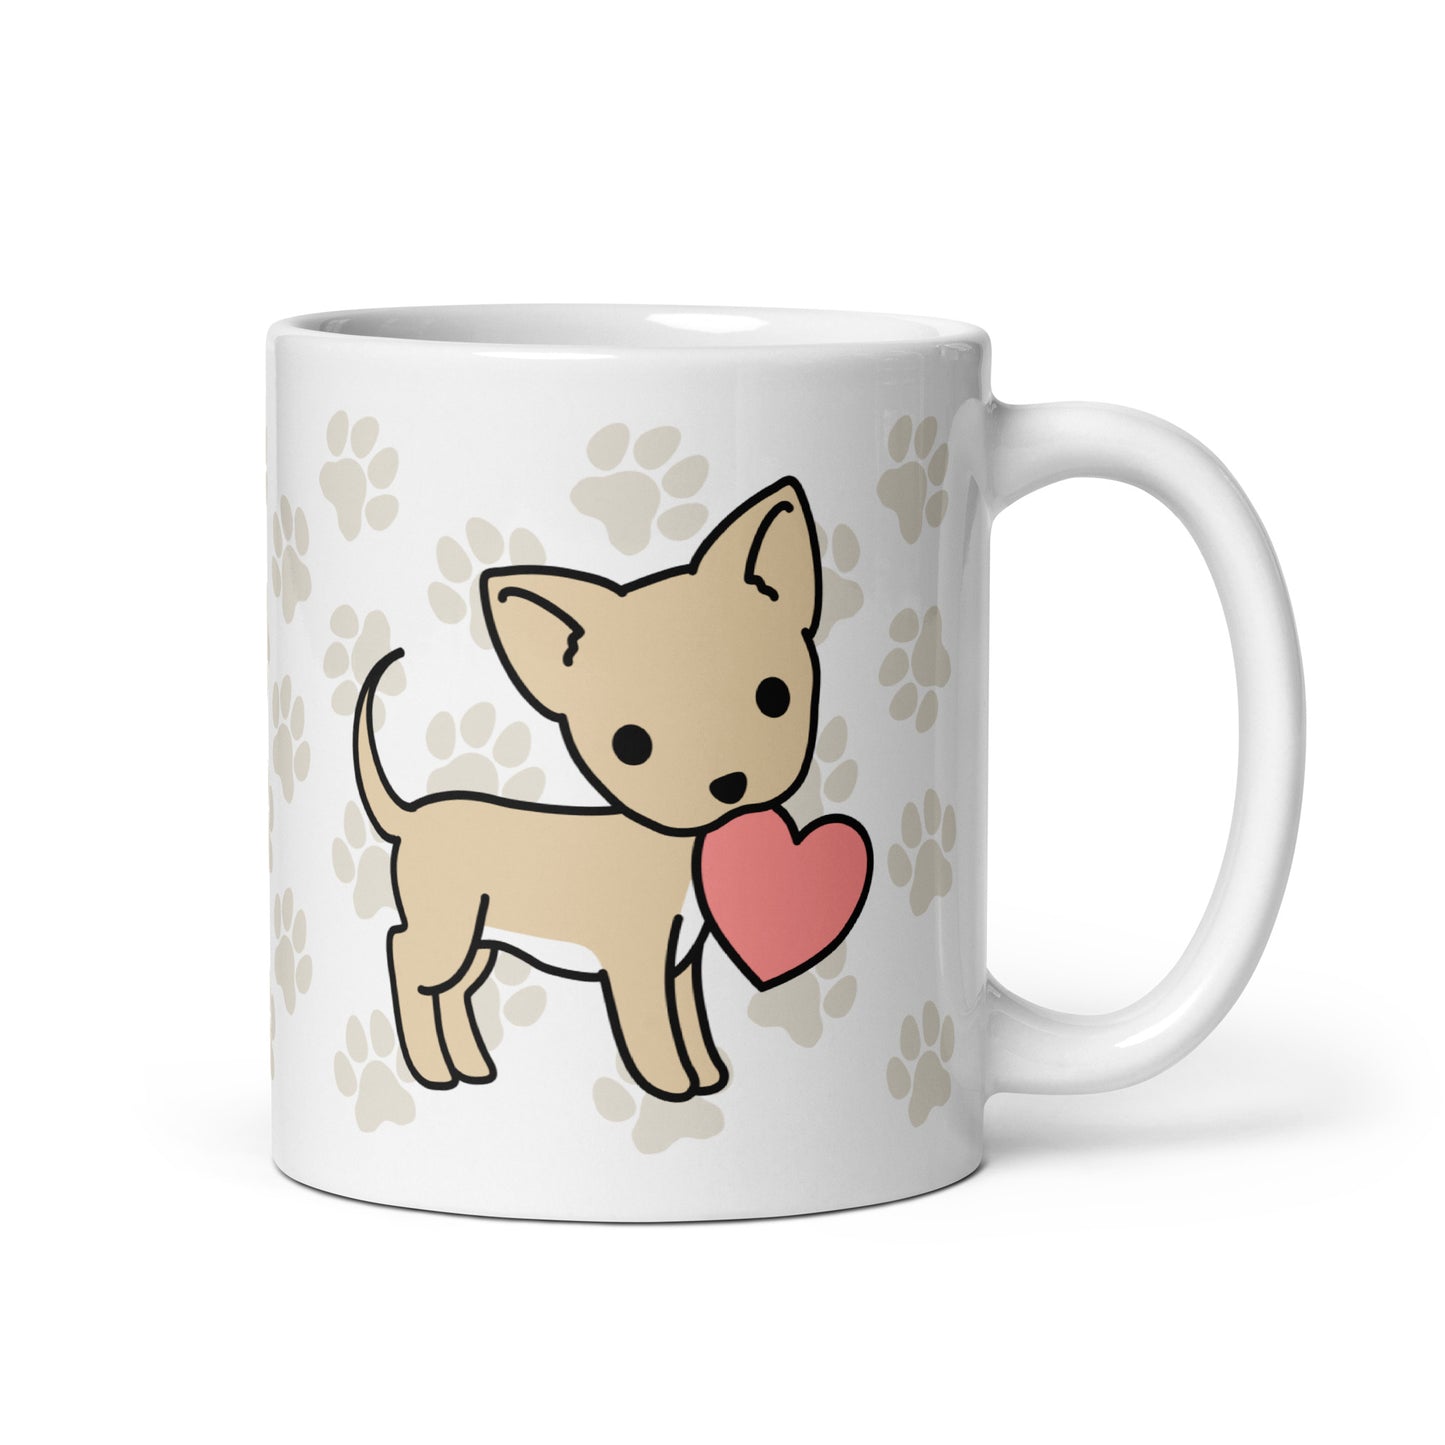 A white 11 ounce ceramic mug with a pattern of light brown pawprints all over. The mug also features a stylized illustration of a Chihuahua holding a heart in its mouth.